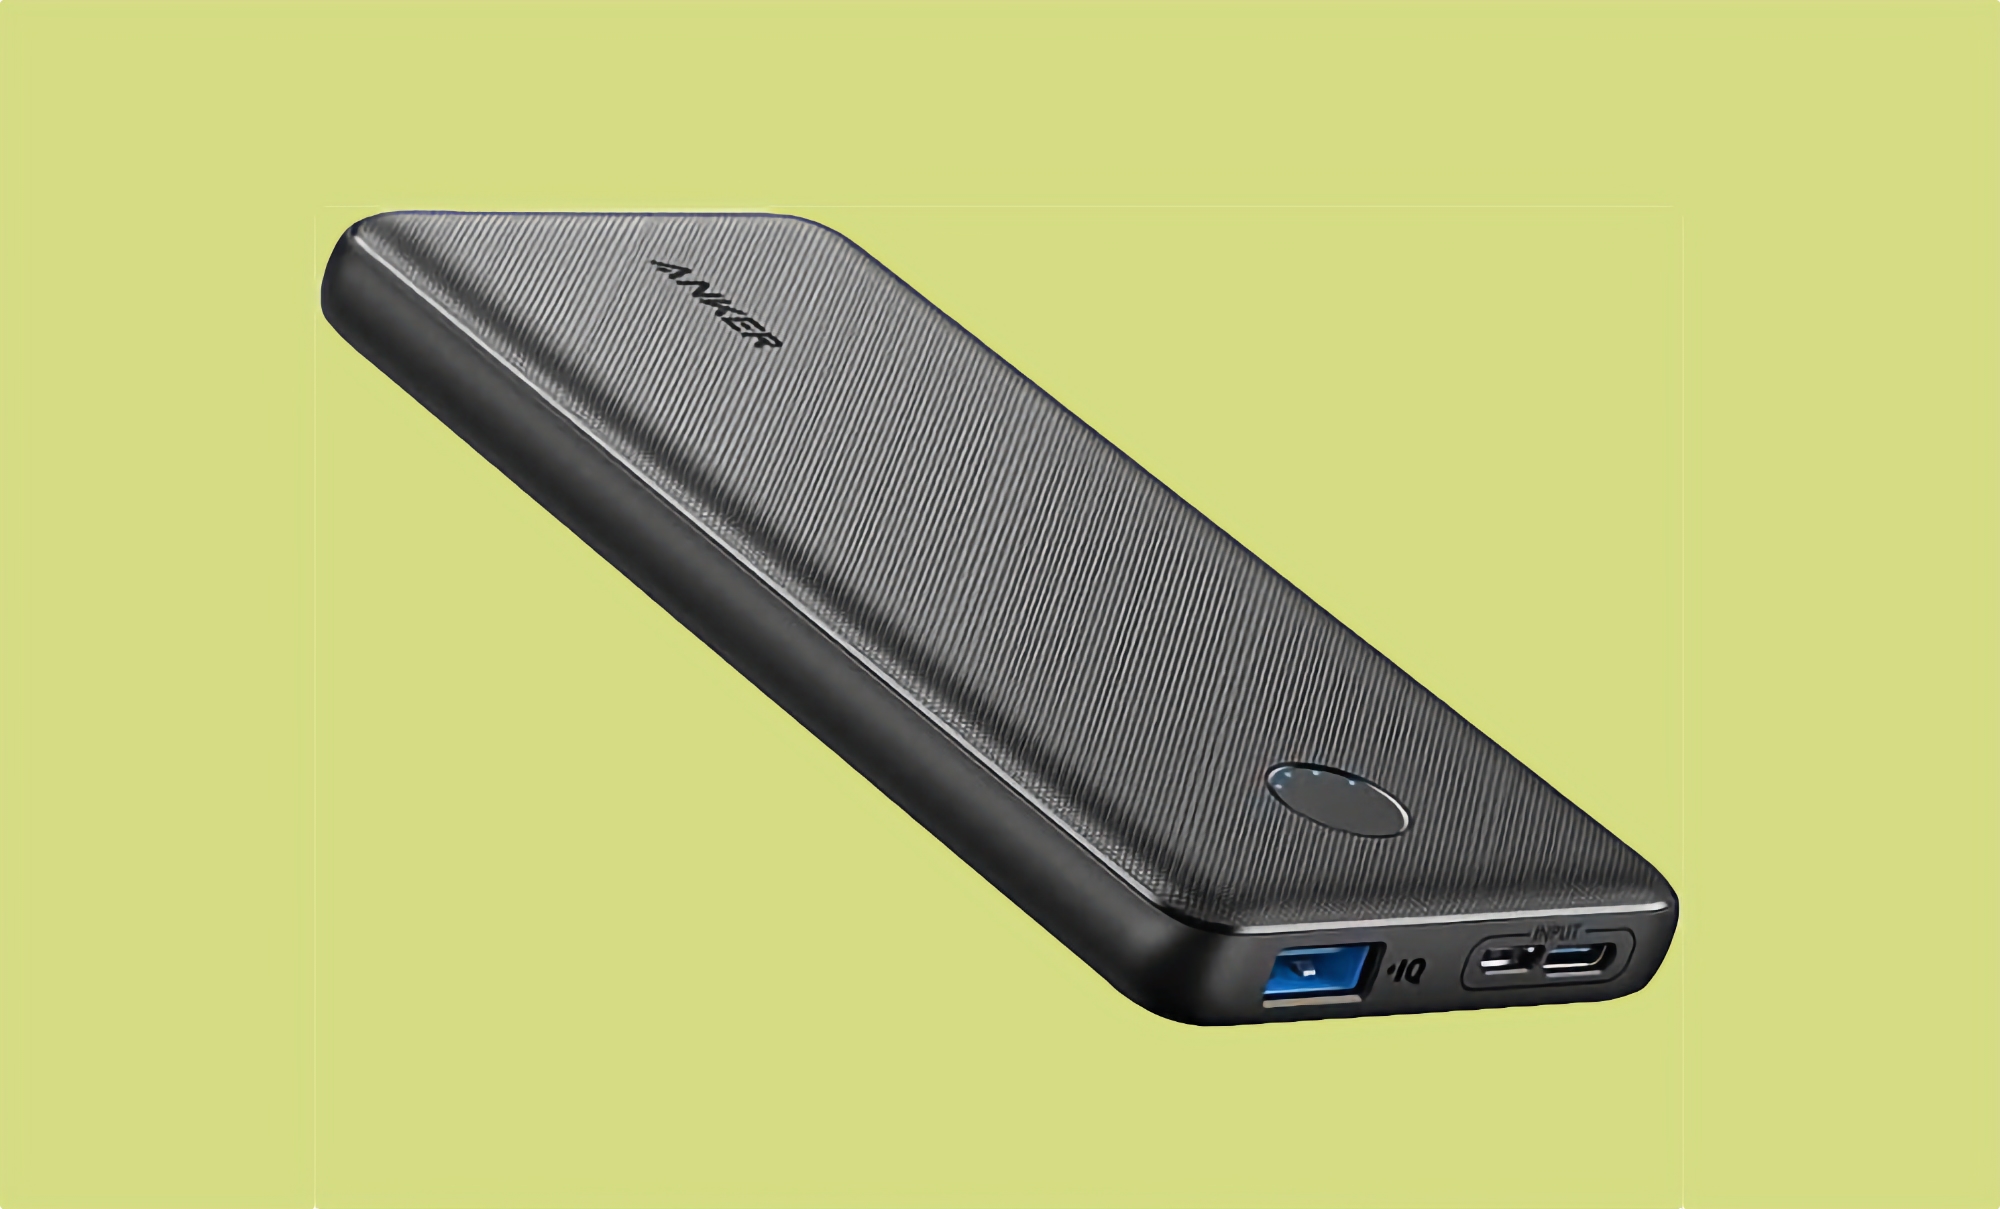 Anker 313 Power Bank on Amazon: 10,000mAh battery with three USB ports for $16